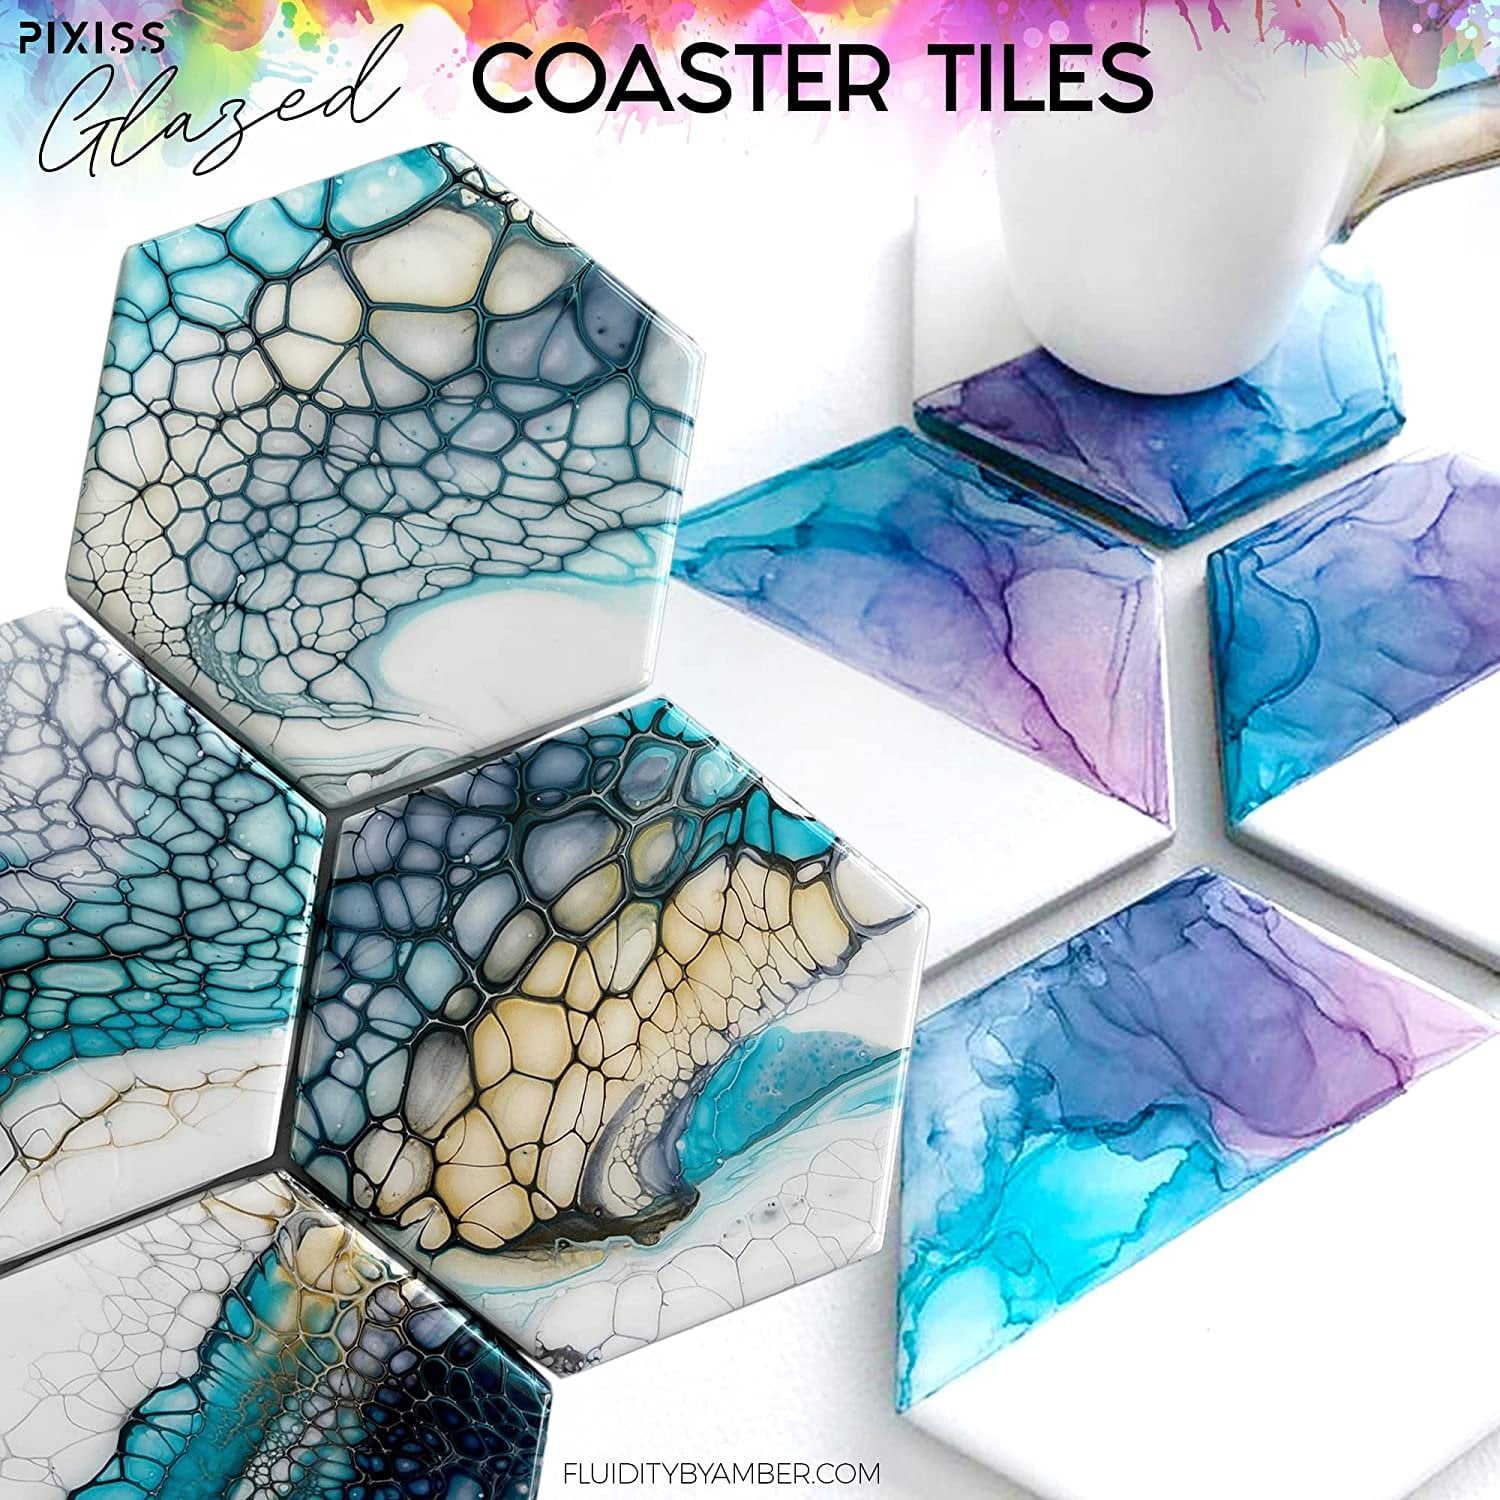 Ceramic Tiles for Craft Coasters - Pixiss 100 Pack Square 4x4 Blank